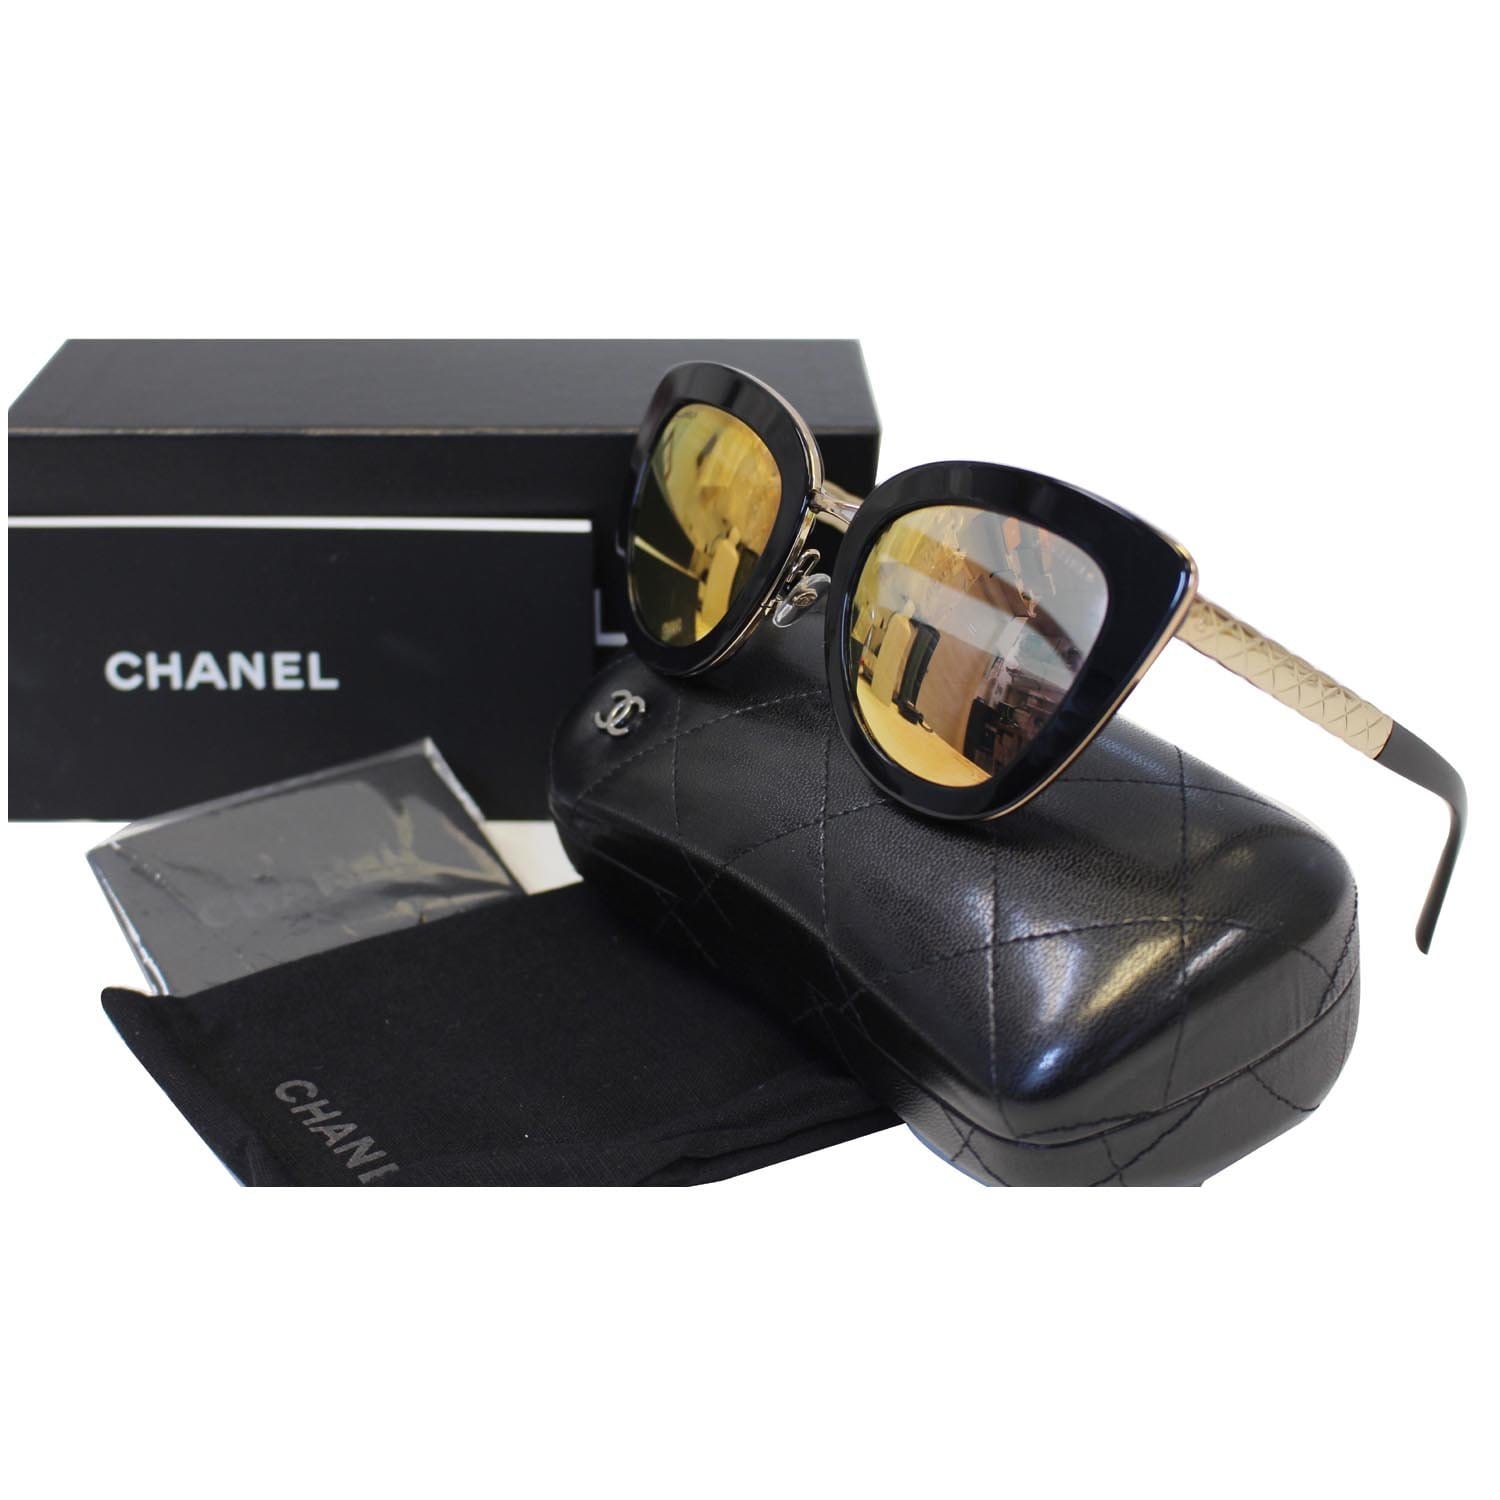 Chanel Cat Eye Sunglasses - Acetate and Tweed, Black and Gold - Polarized - UV Protected - Women's Sunglasses - 9129 C622/S4